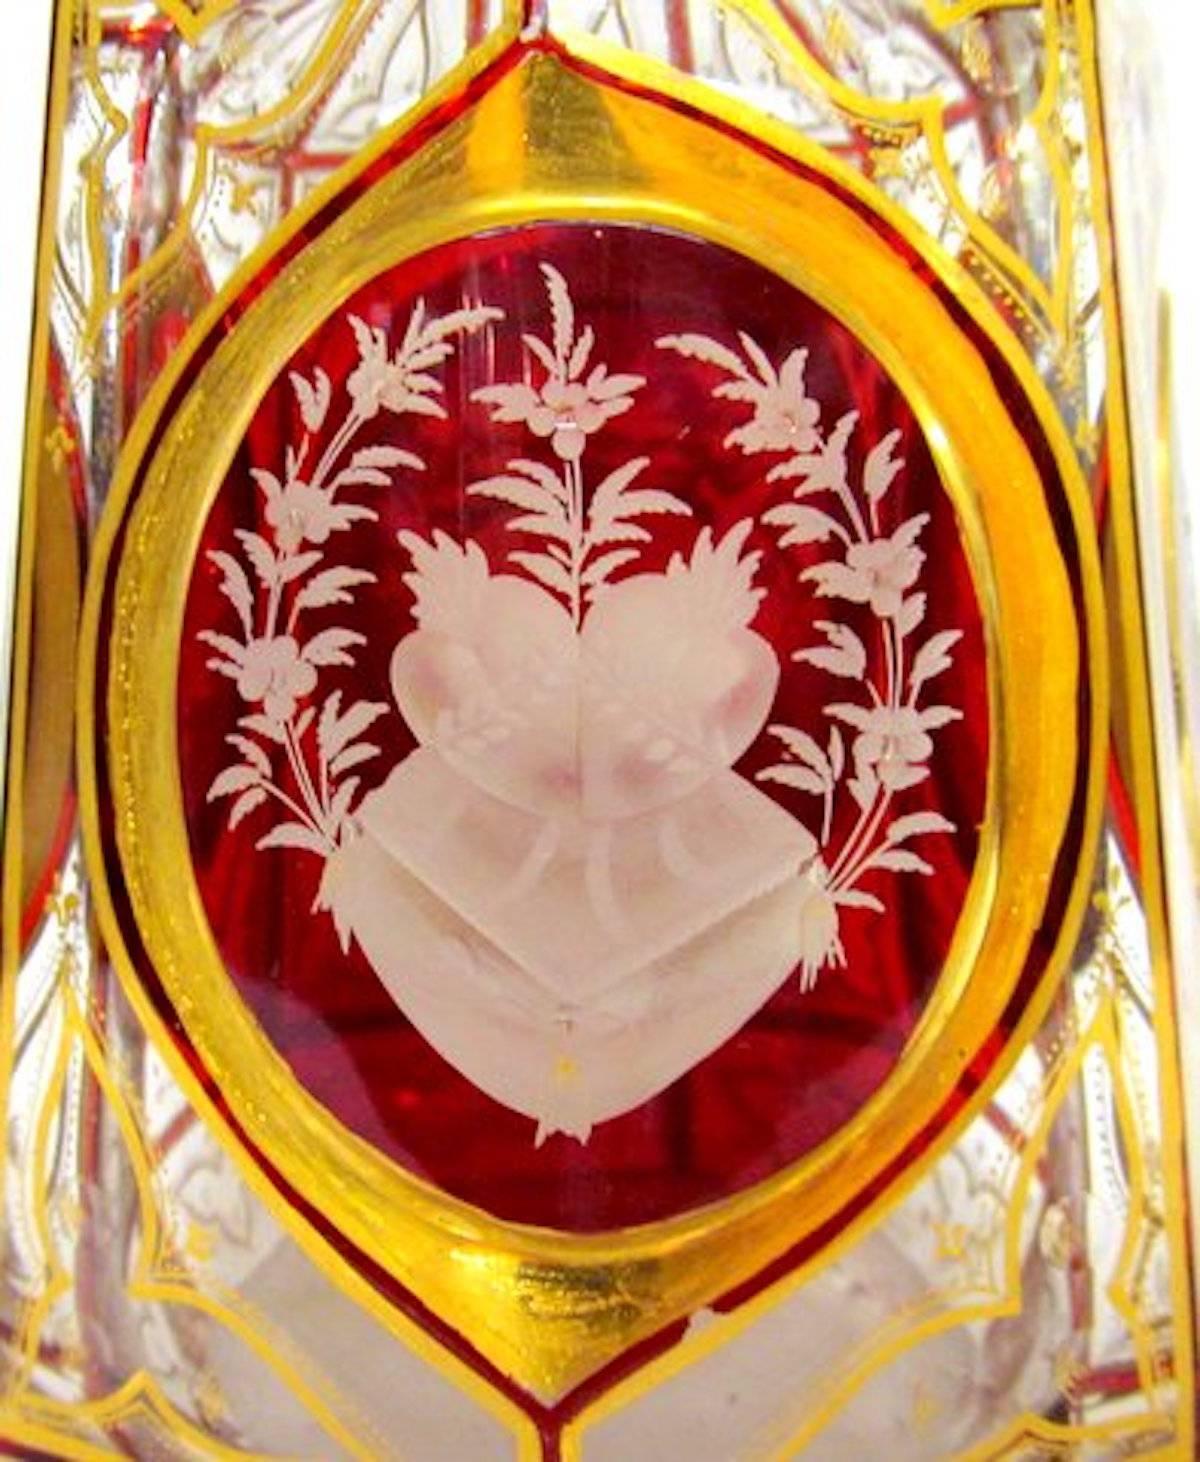 20th Century Old 'Moser' Hand-Cut and Engraved Ruby Overlay Ecclesiastical Decanter